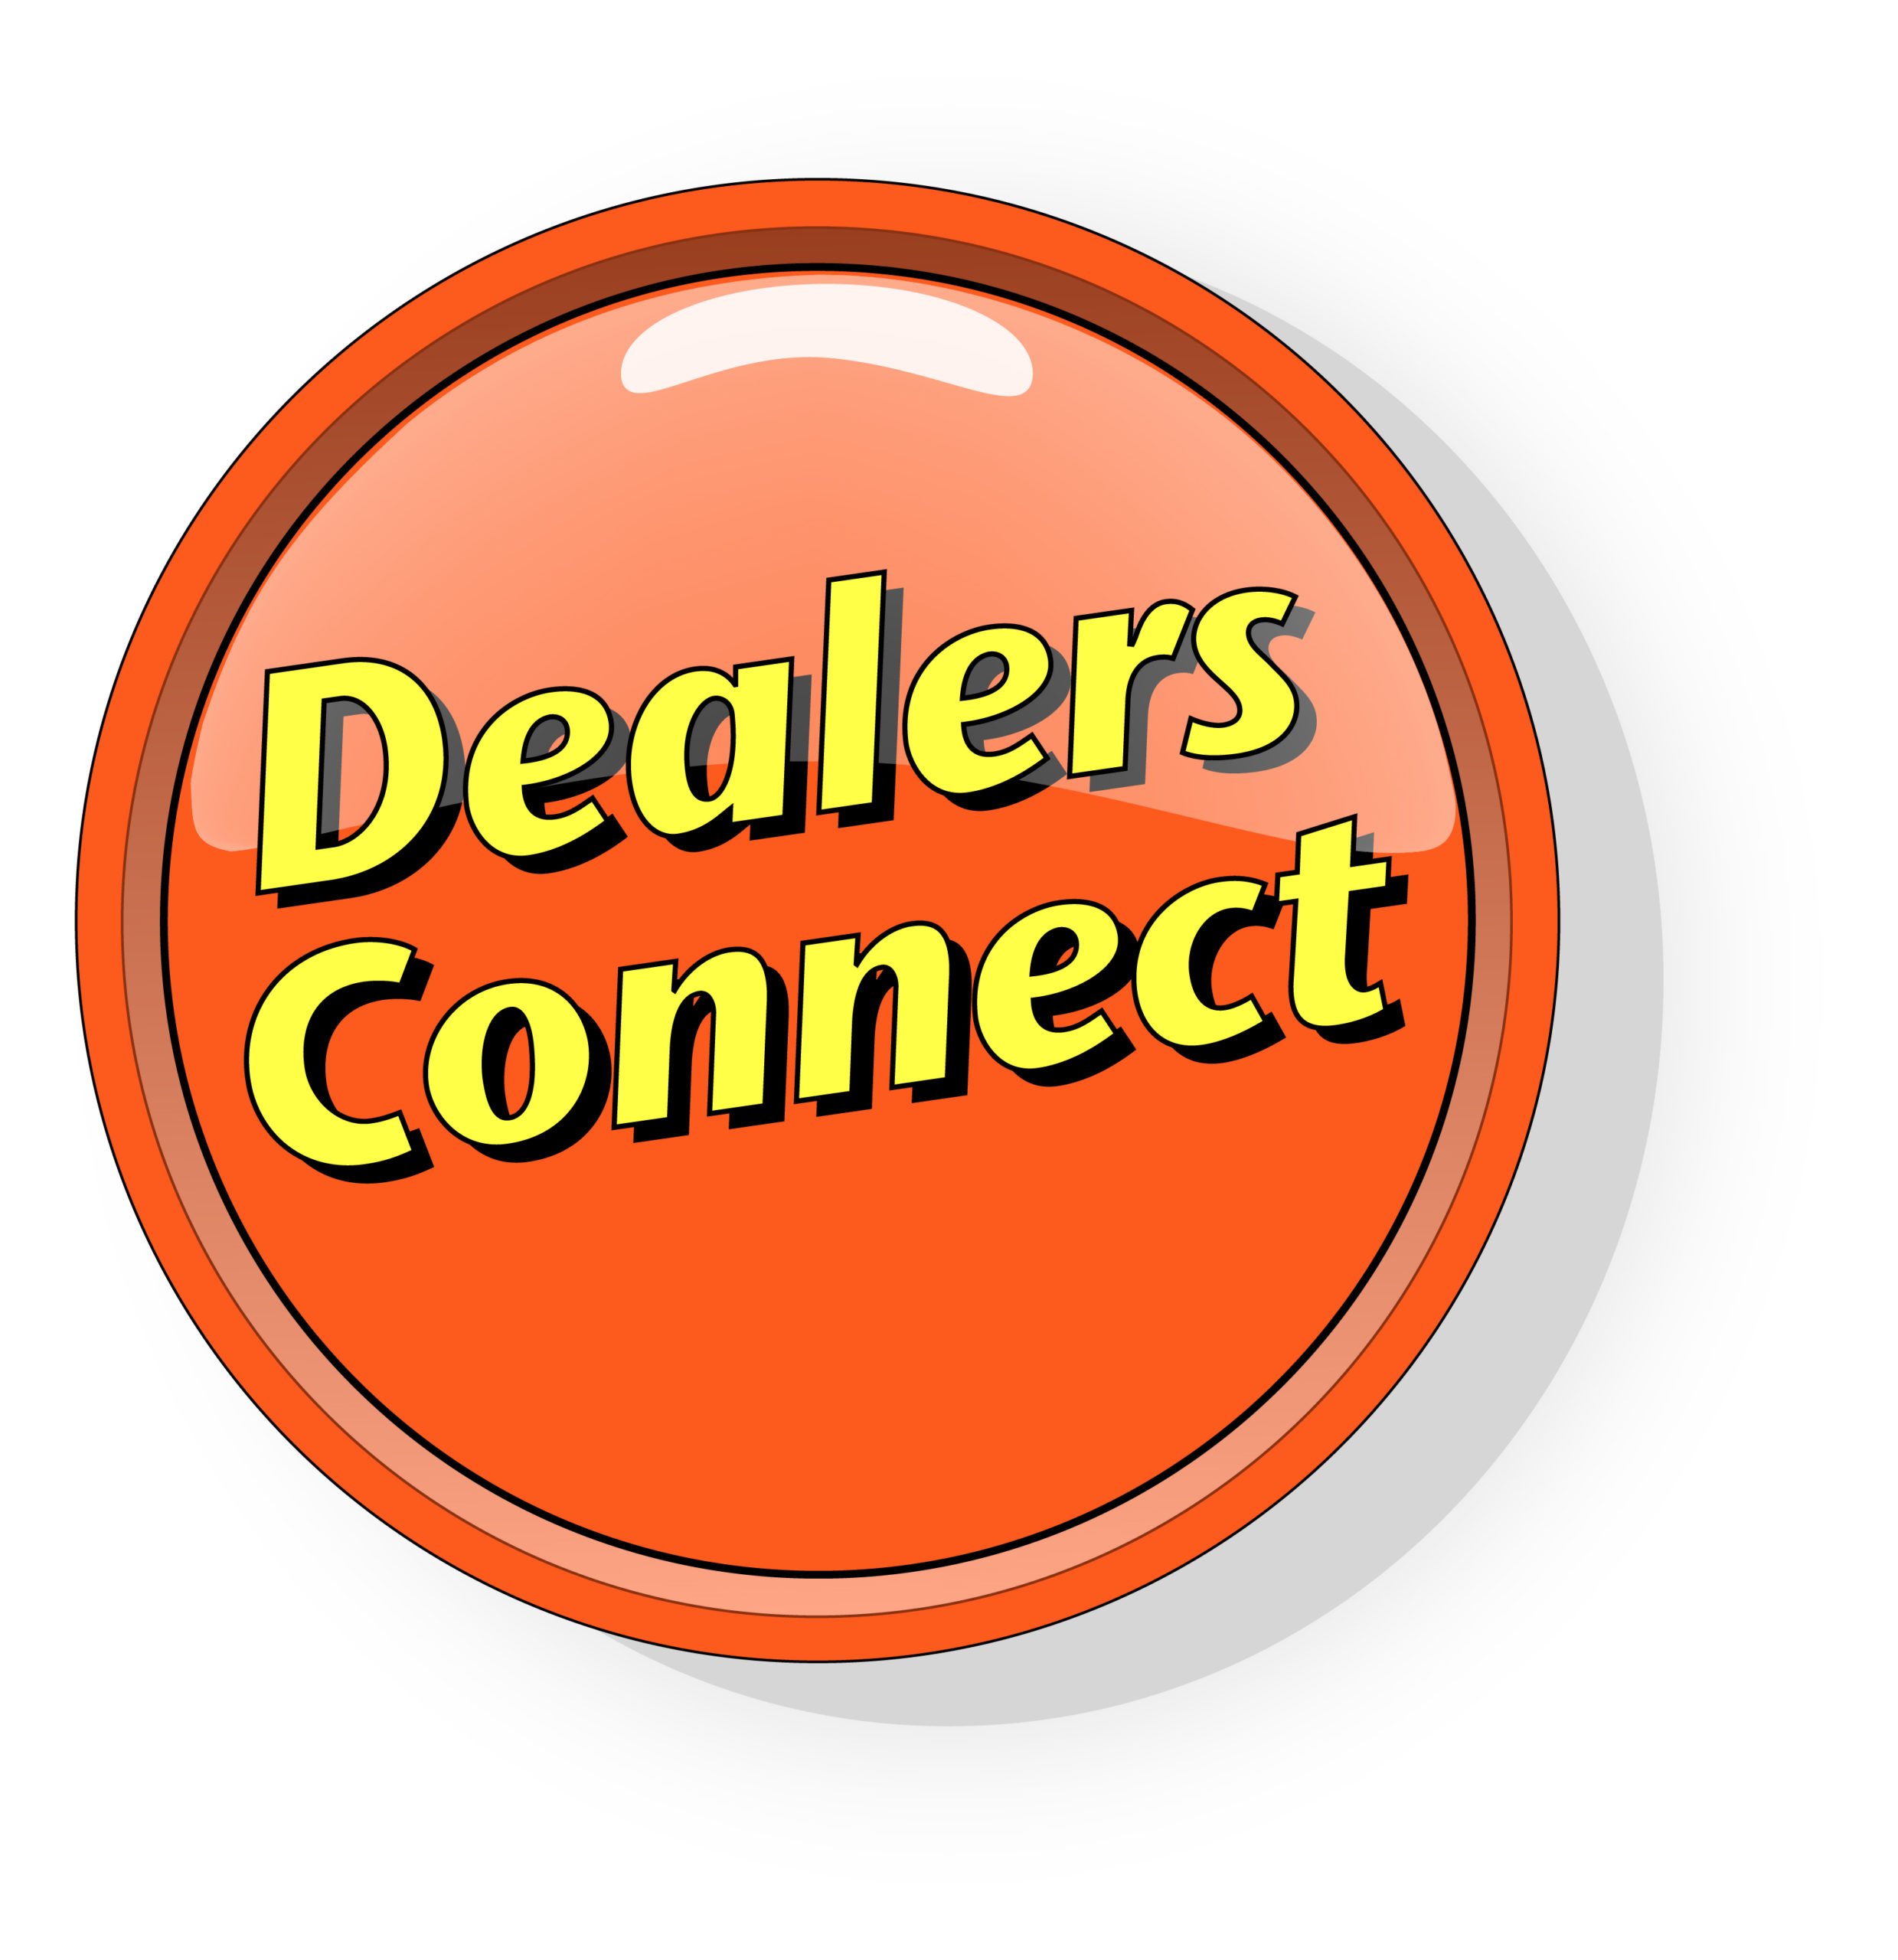 Dealers Connect